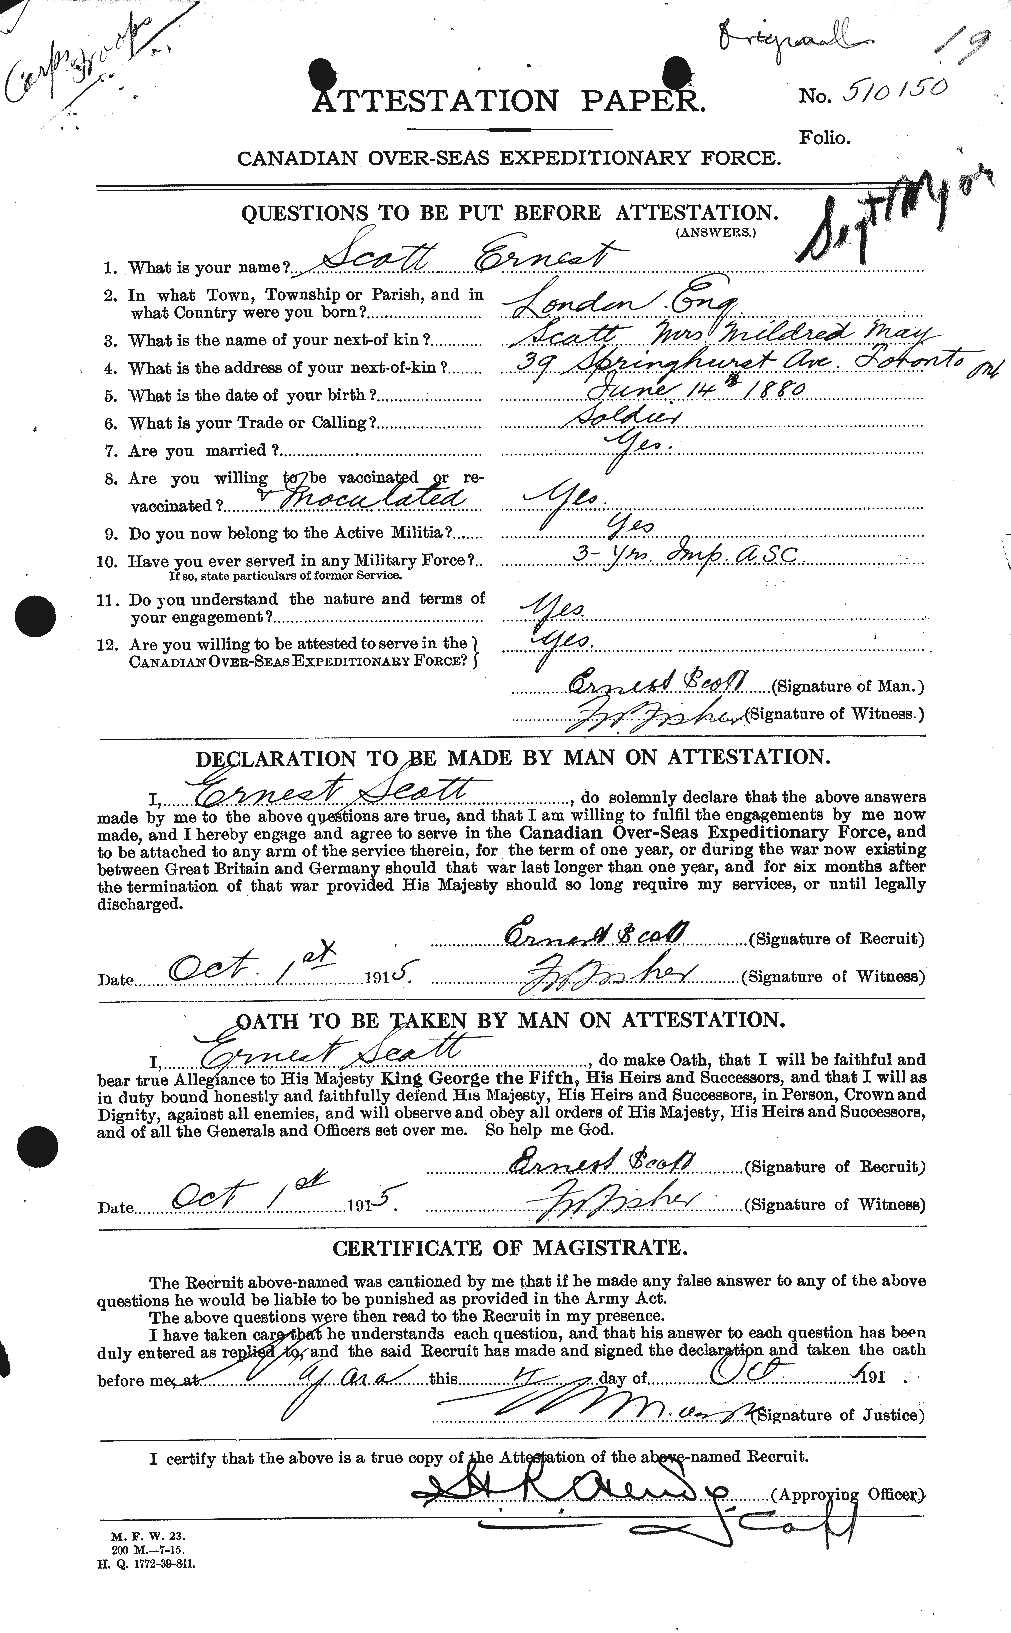 Personnel Records of the First World War - CEF 085017a